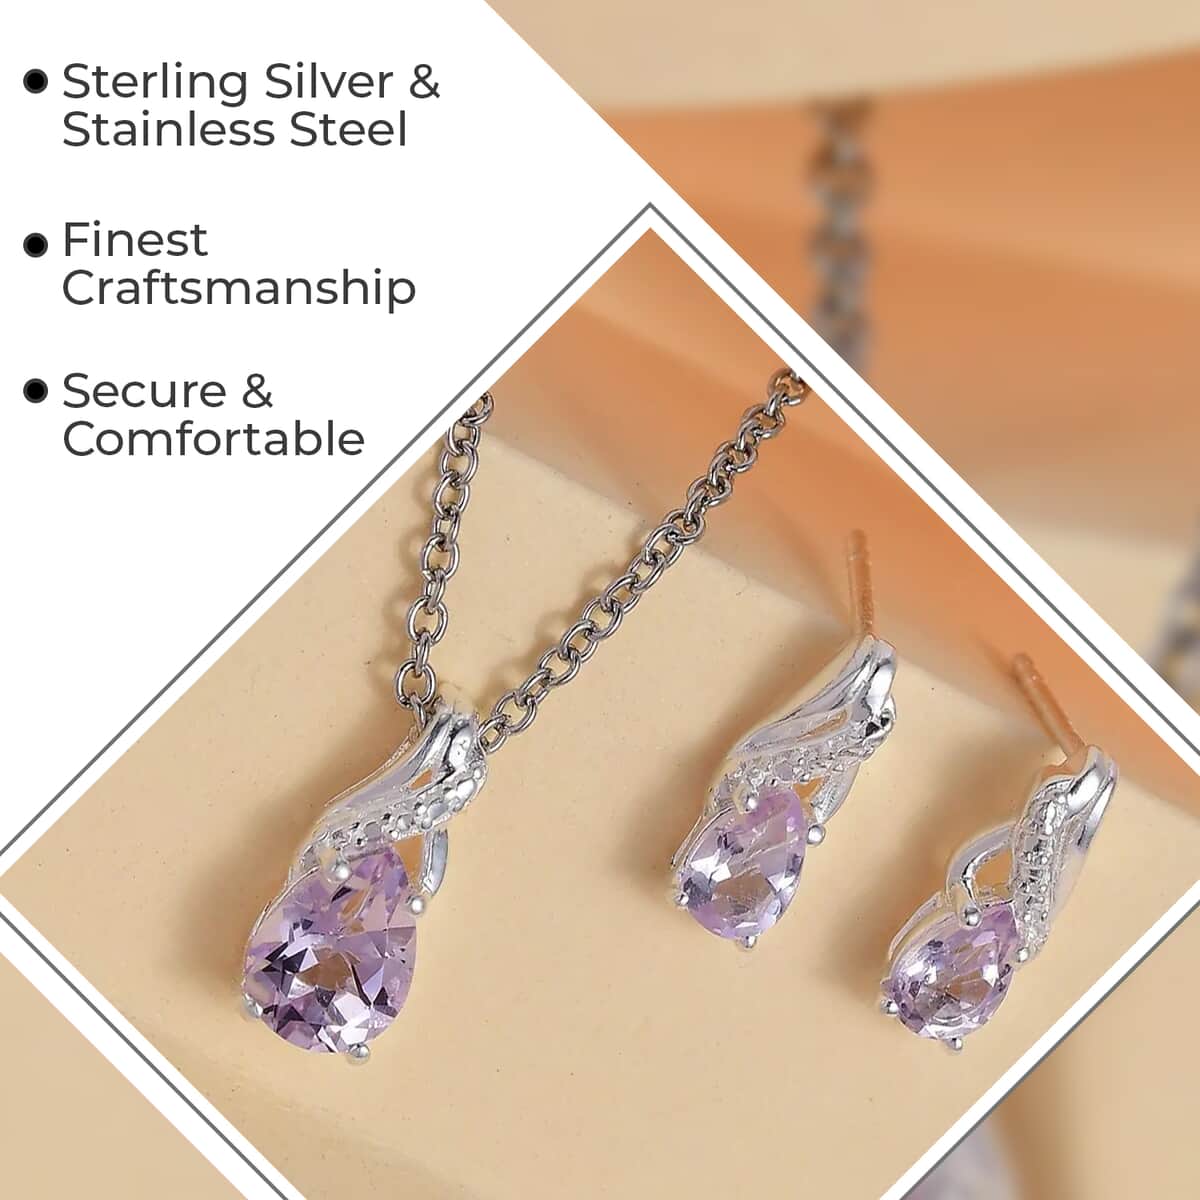 Rose De France Amethyst Earrings and Pendant Necklace Jewelry Set, Sterling Silver and Stainless Steel Jewelry Set, Set of Amethyst Earrings and Amethyst Pendant Necklace 1.65 ctw image number 2